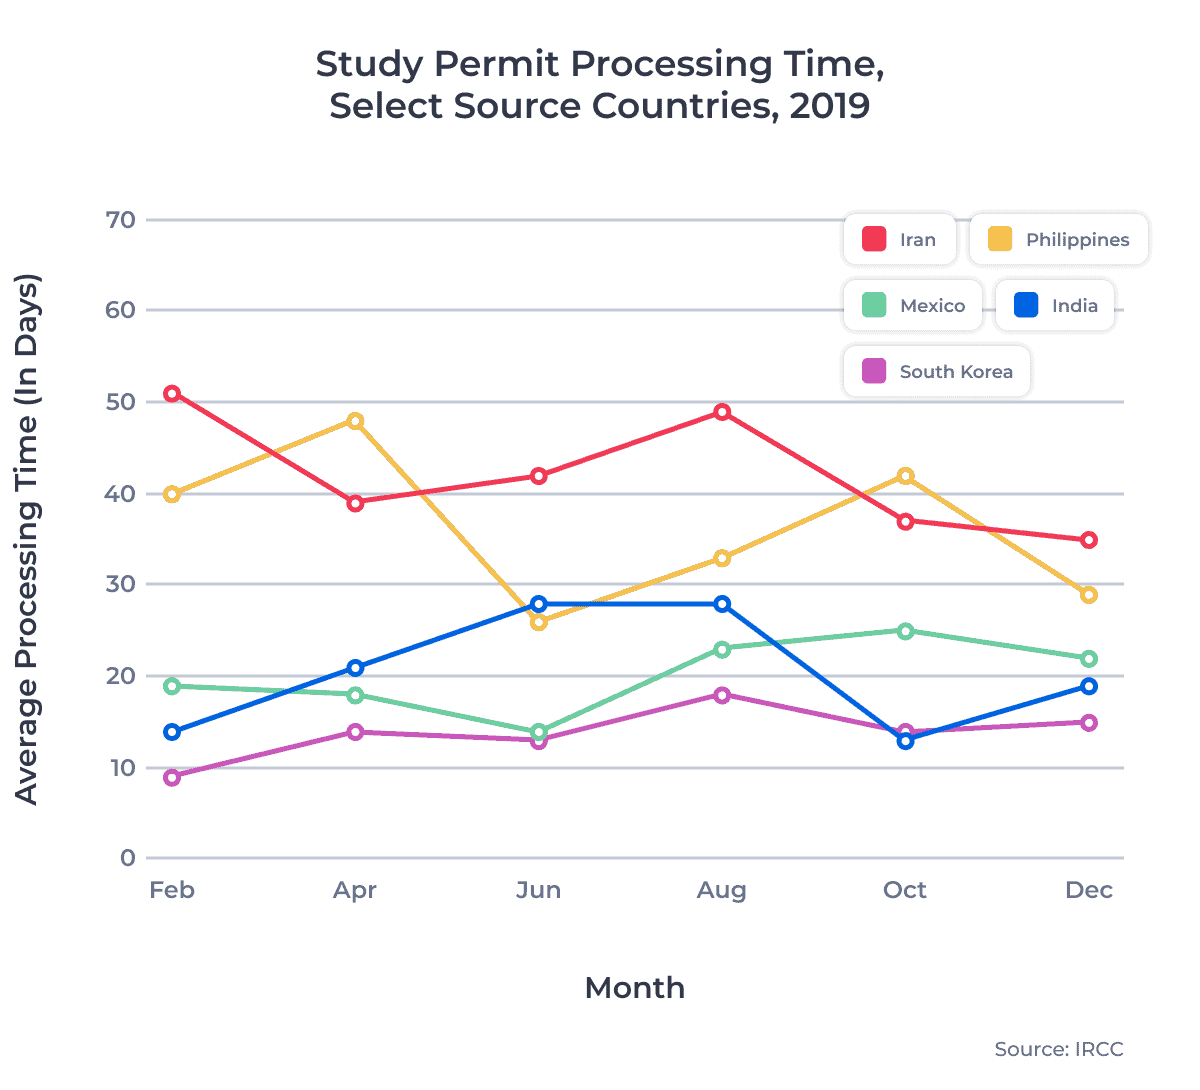 Study Permit Processing Time, Select Source Countries, 2019